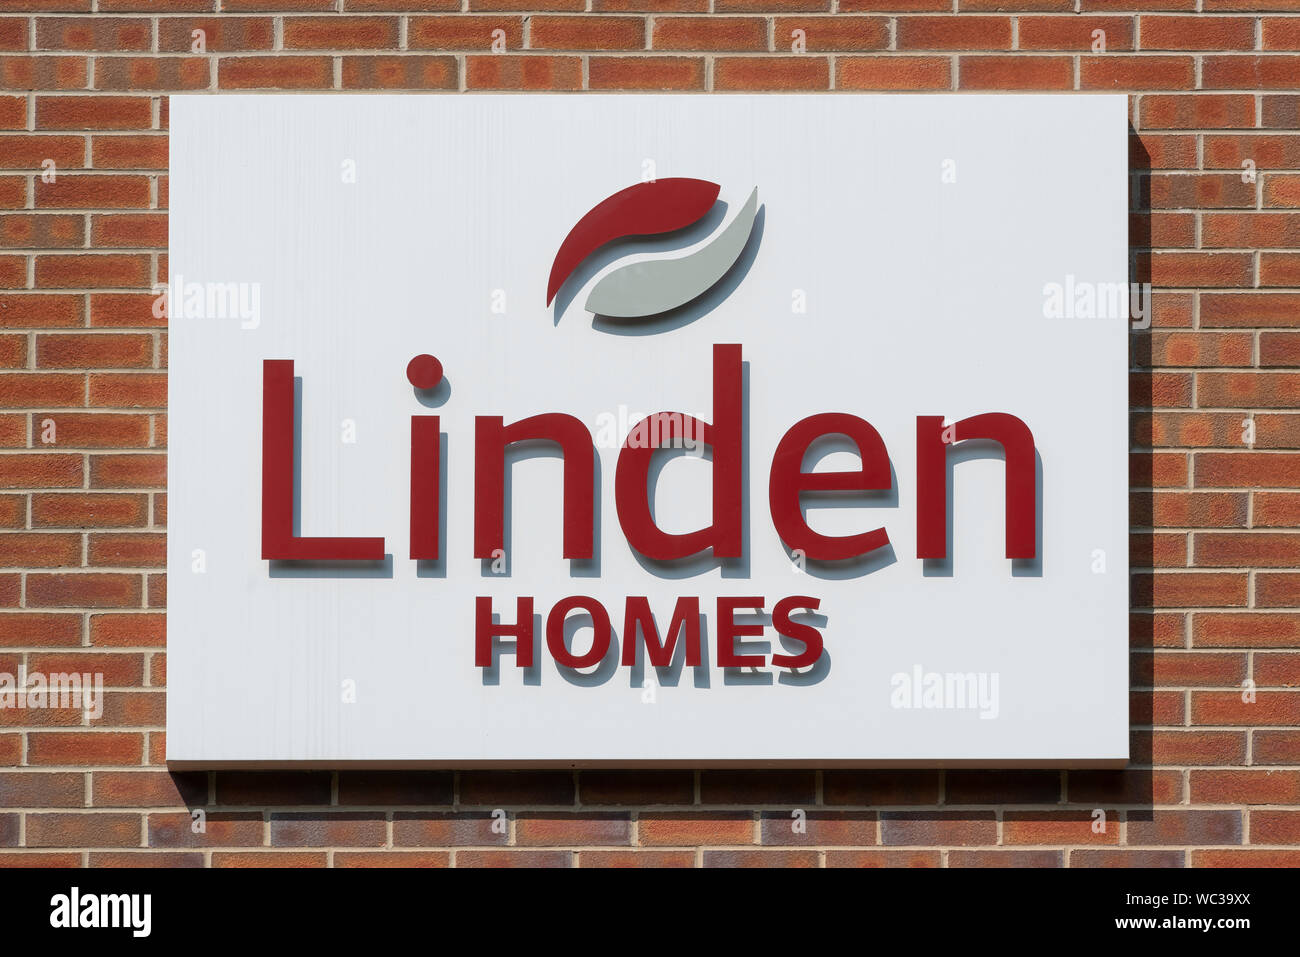 Signage indicating the sale of Linden Homes houses (part of Galliford Try) located in the Brunswick area of Manchester, UK. (Editorial use only). Stock Photo